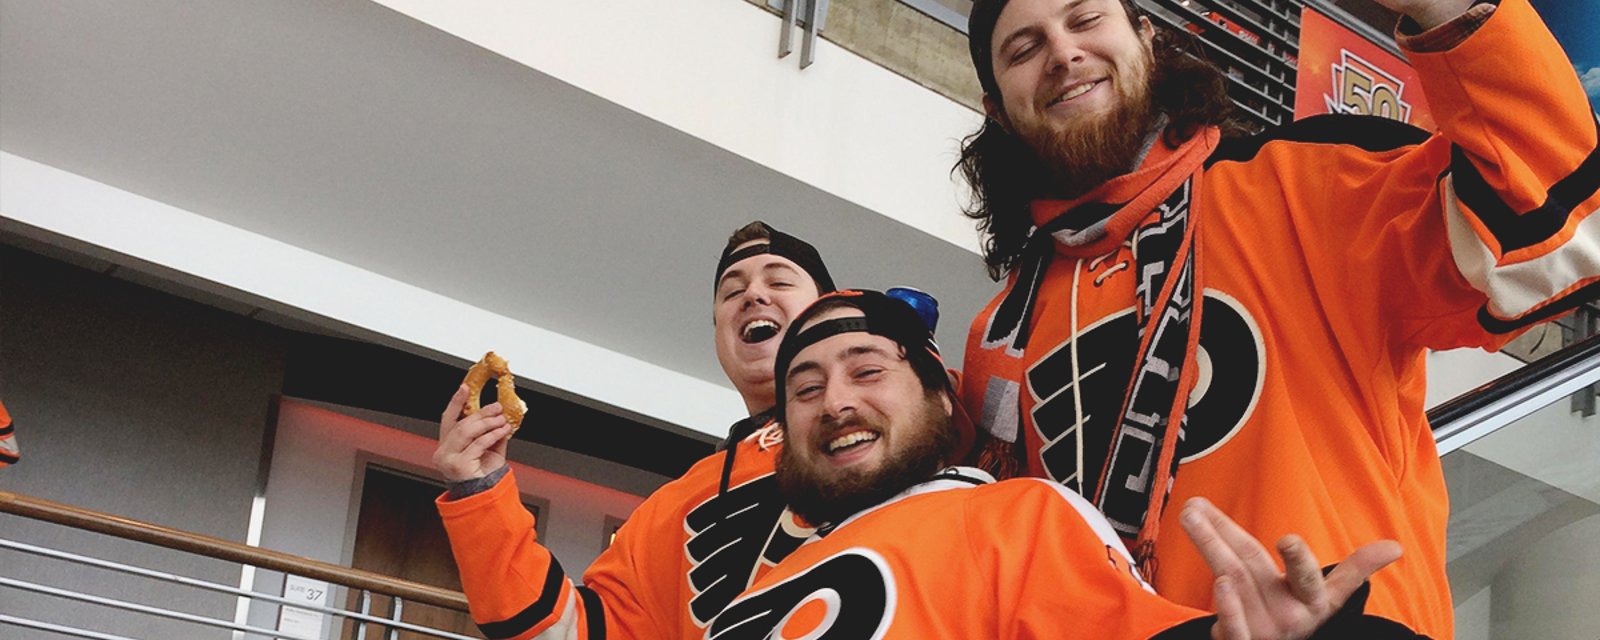 NHL community, two fans need your help to find these men!